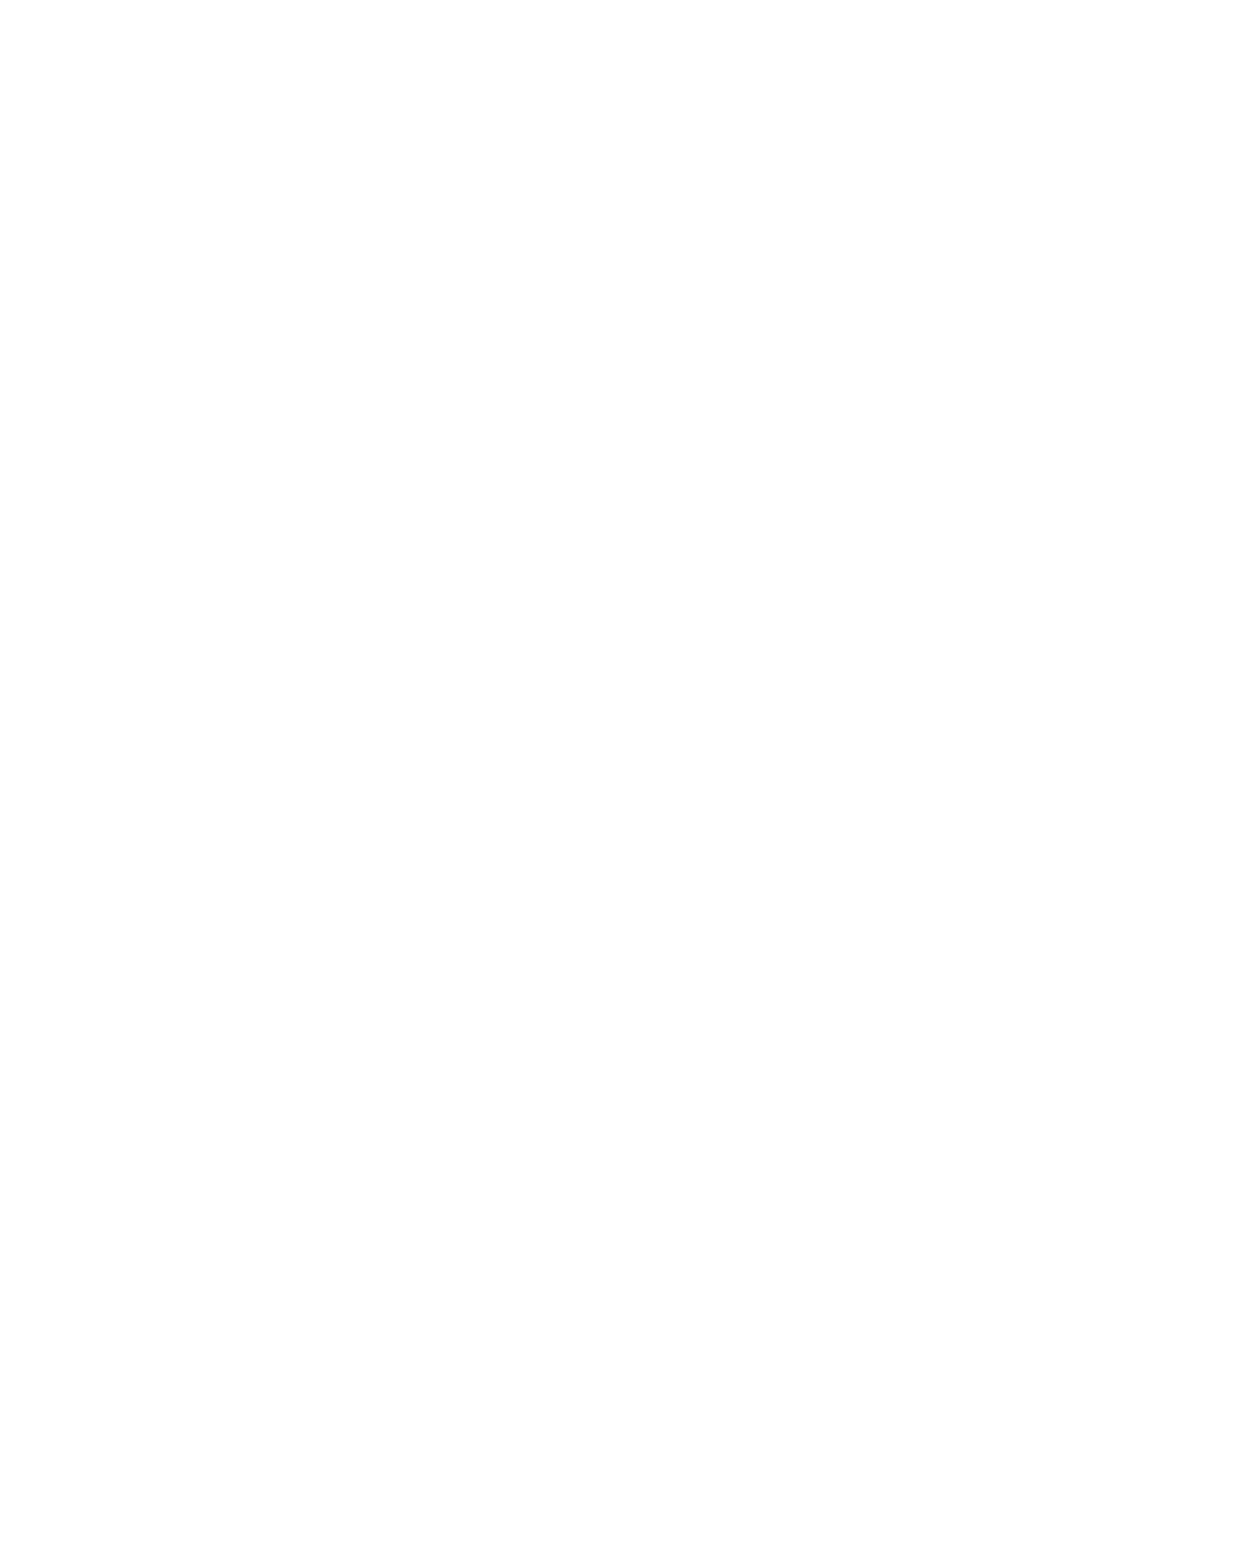 Luckin Coffee logo pour fonds sombres (PNG transparent)